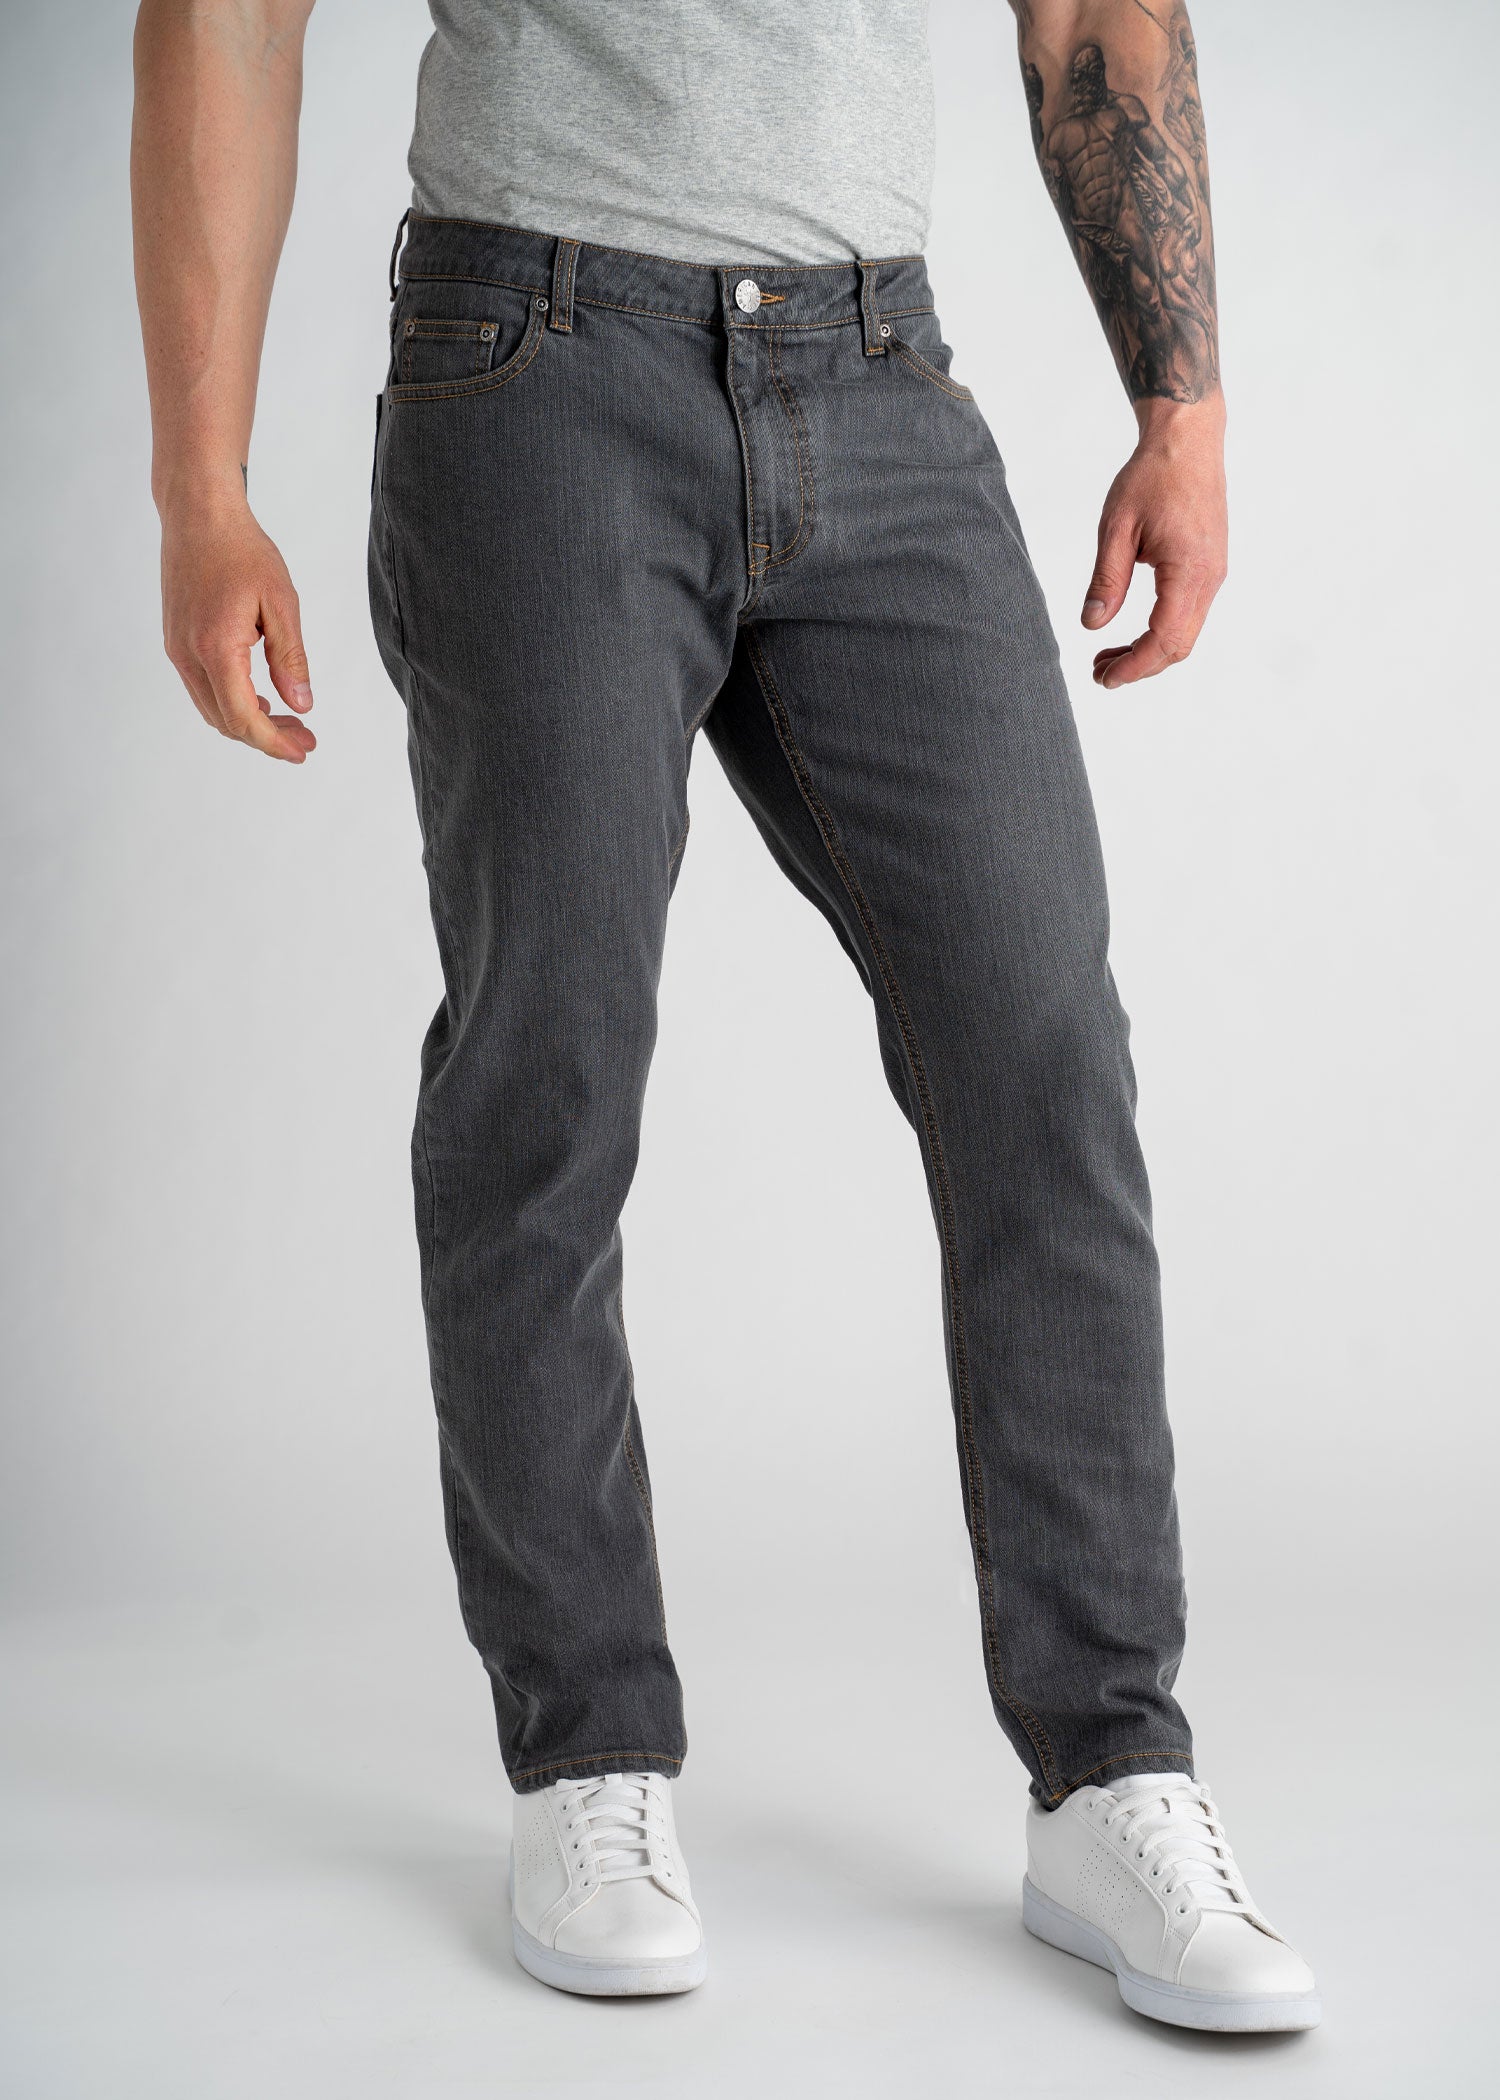 american-tall-mens-carman-jeans-grey-front